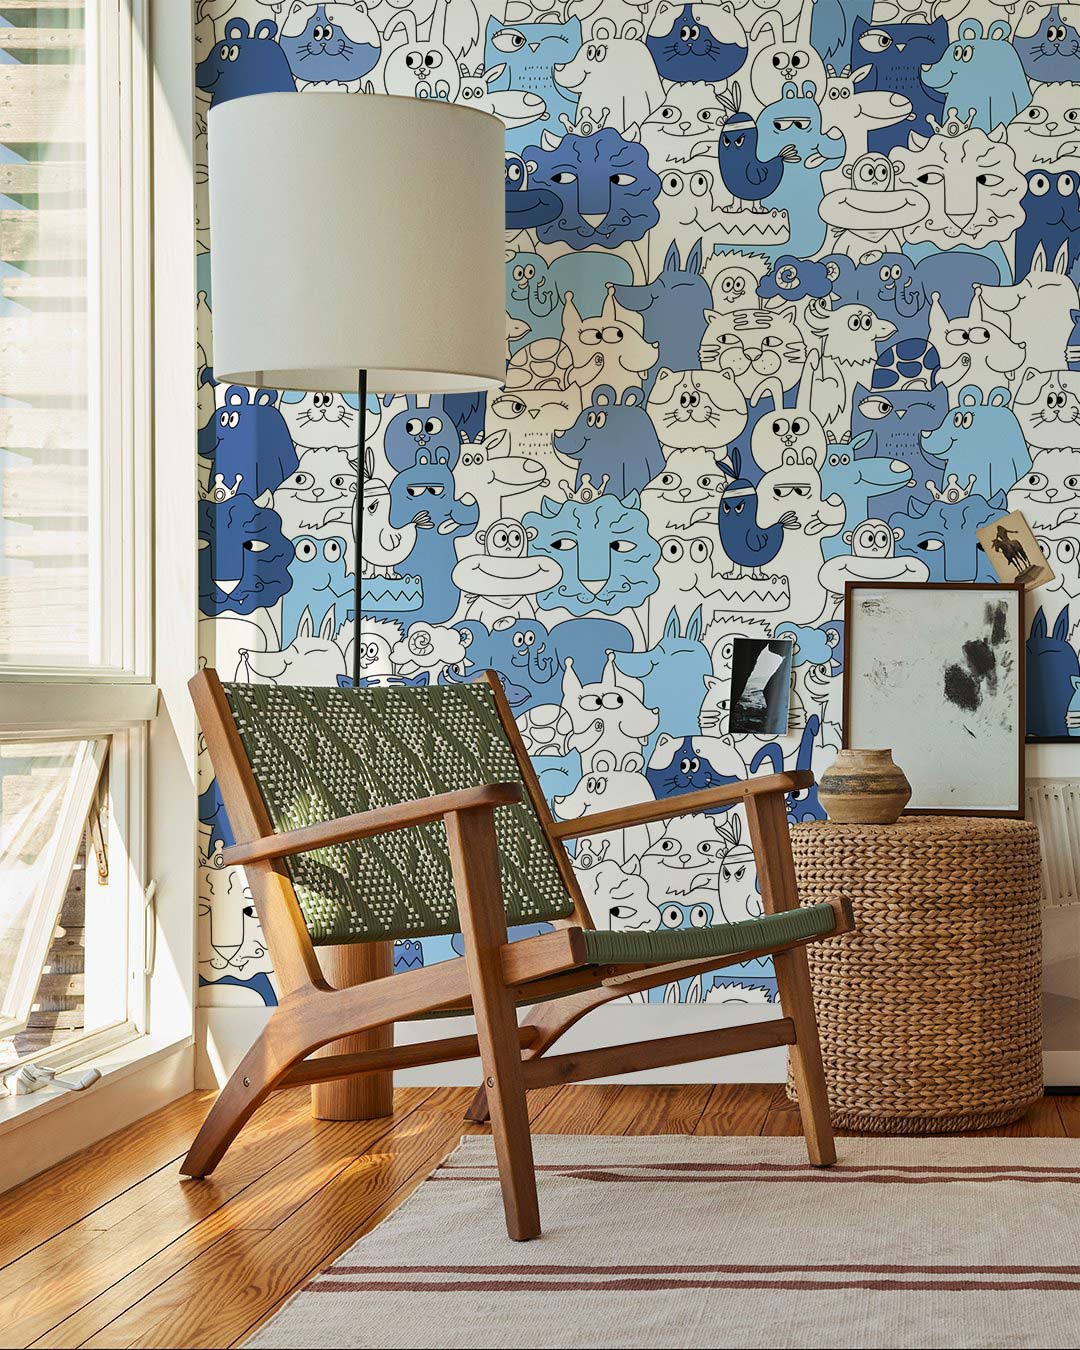 Blue Mural Wallpaper with Various Unique Animals for Use as Decoration in Hallways